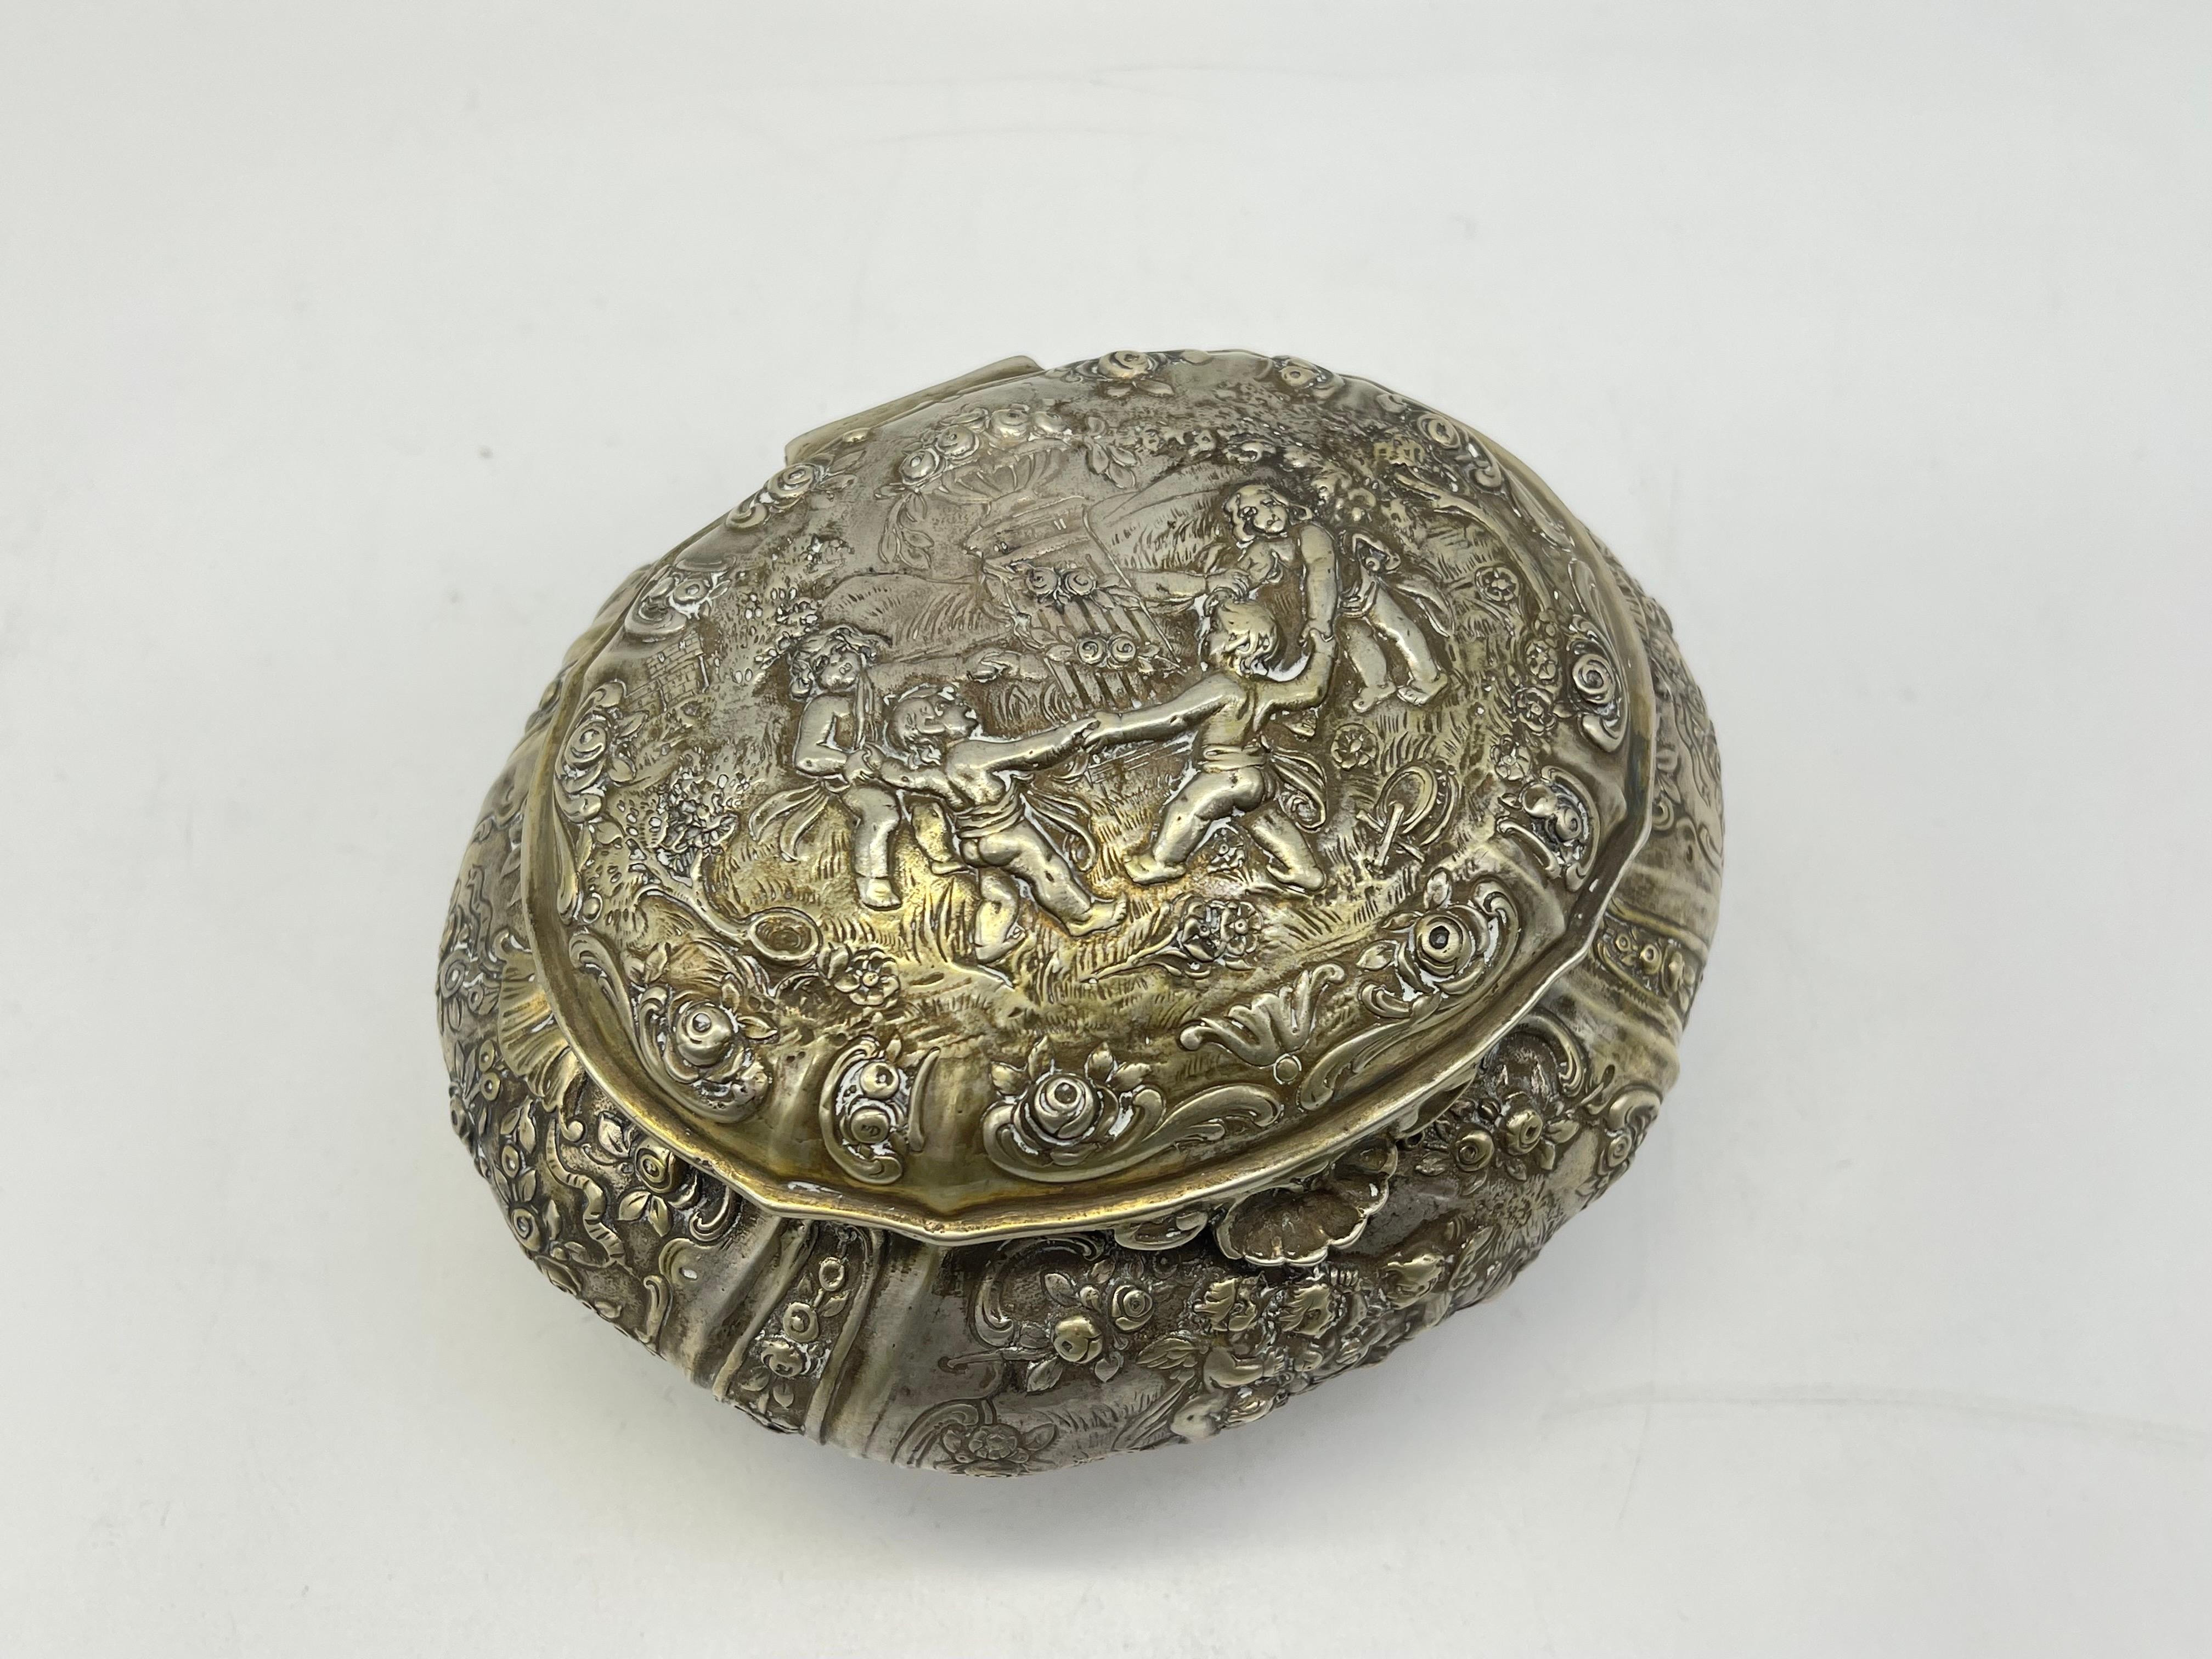 Antique 800 Silver Bonboniere / Sugar- Lidded box

Half moon & crown - Germany - 800 Silver
Flowers, Putto & Children ornament - inside gilded
stand on 4 feet

Weight: 372 grams

The condition can be seen in the pictures.